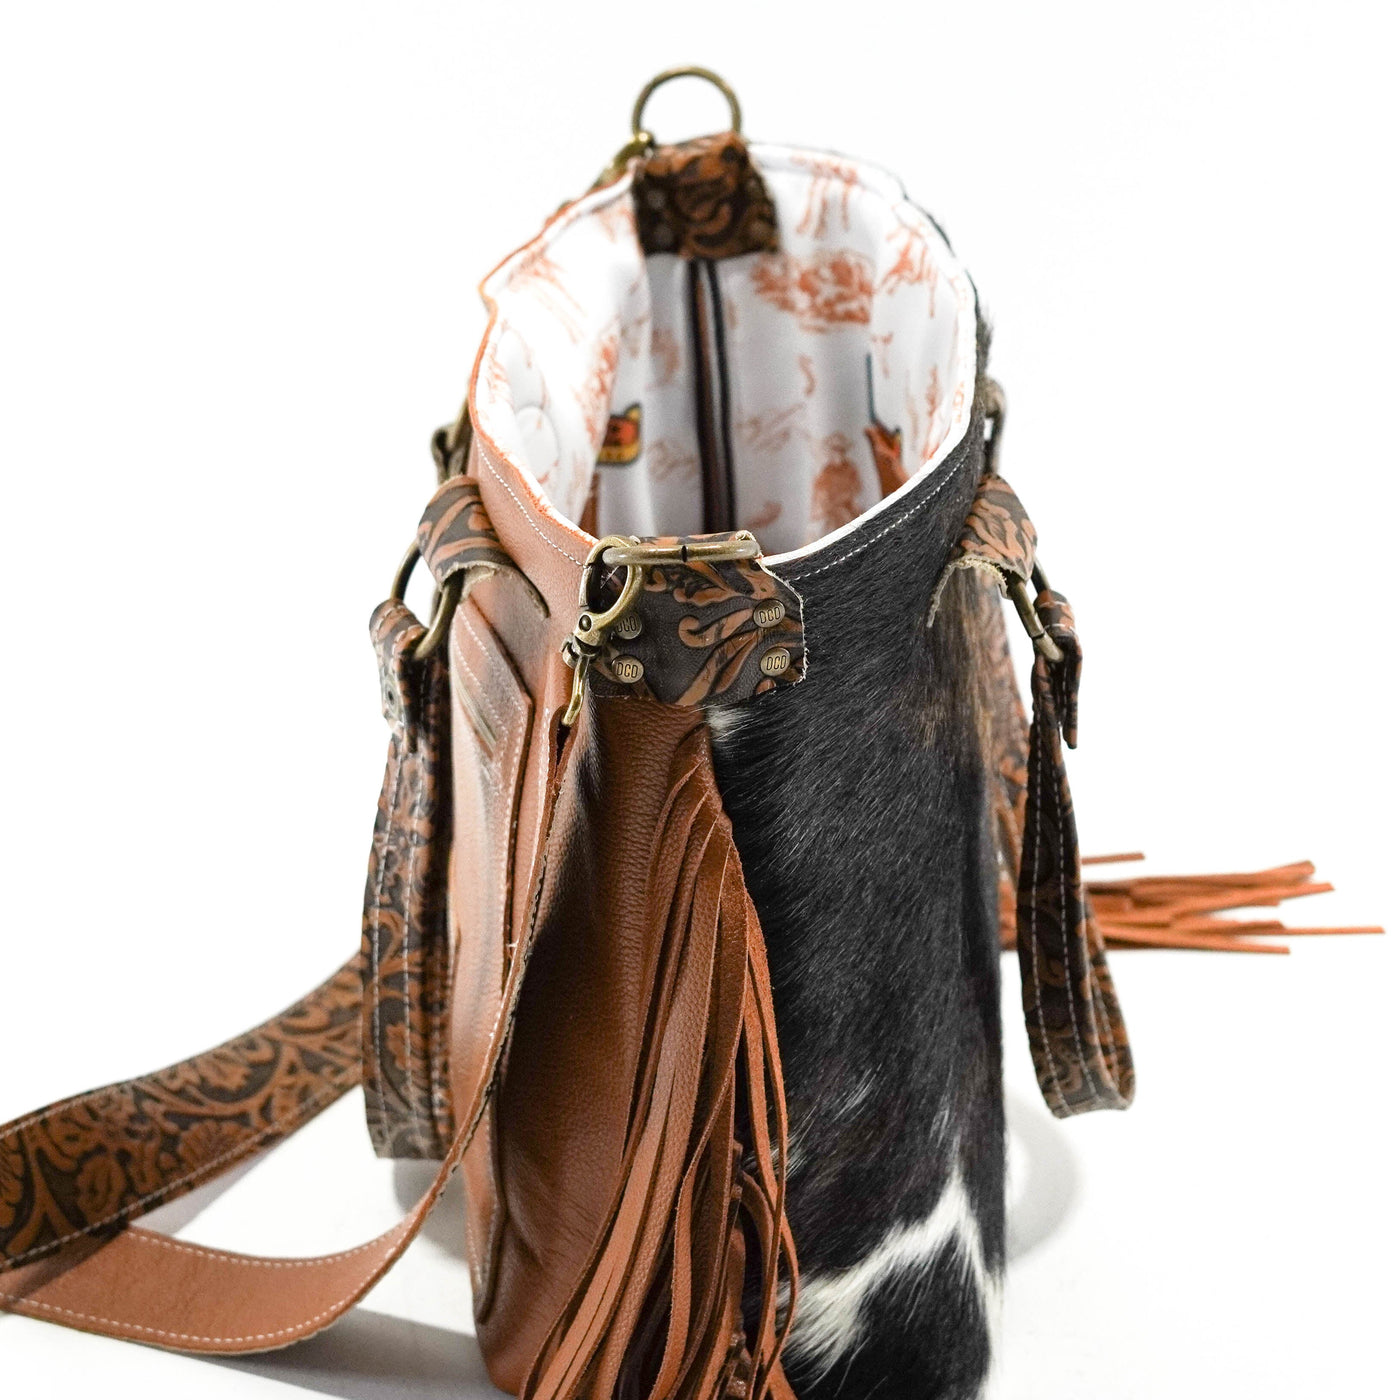 Taylor - Tricolor w/ Honey Tool-Taylor-Western-Cowhide-Bags-Handmade-Products-Gifts-Dancing Cactus Designs